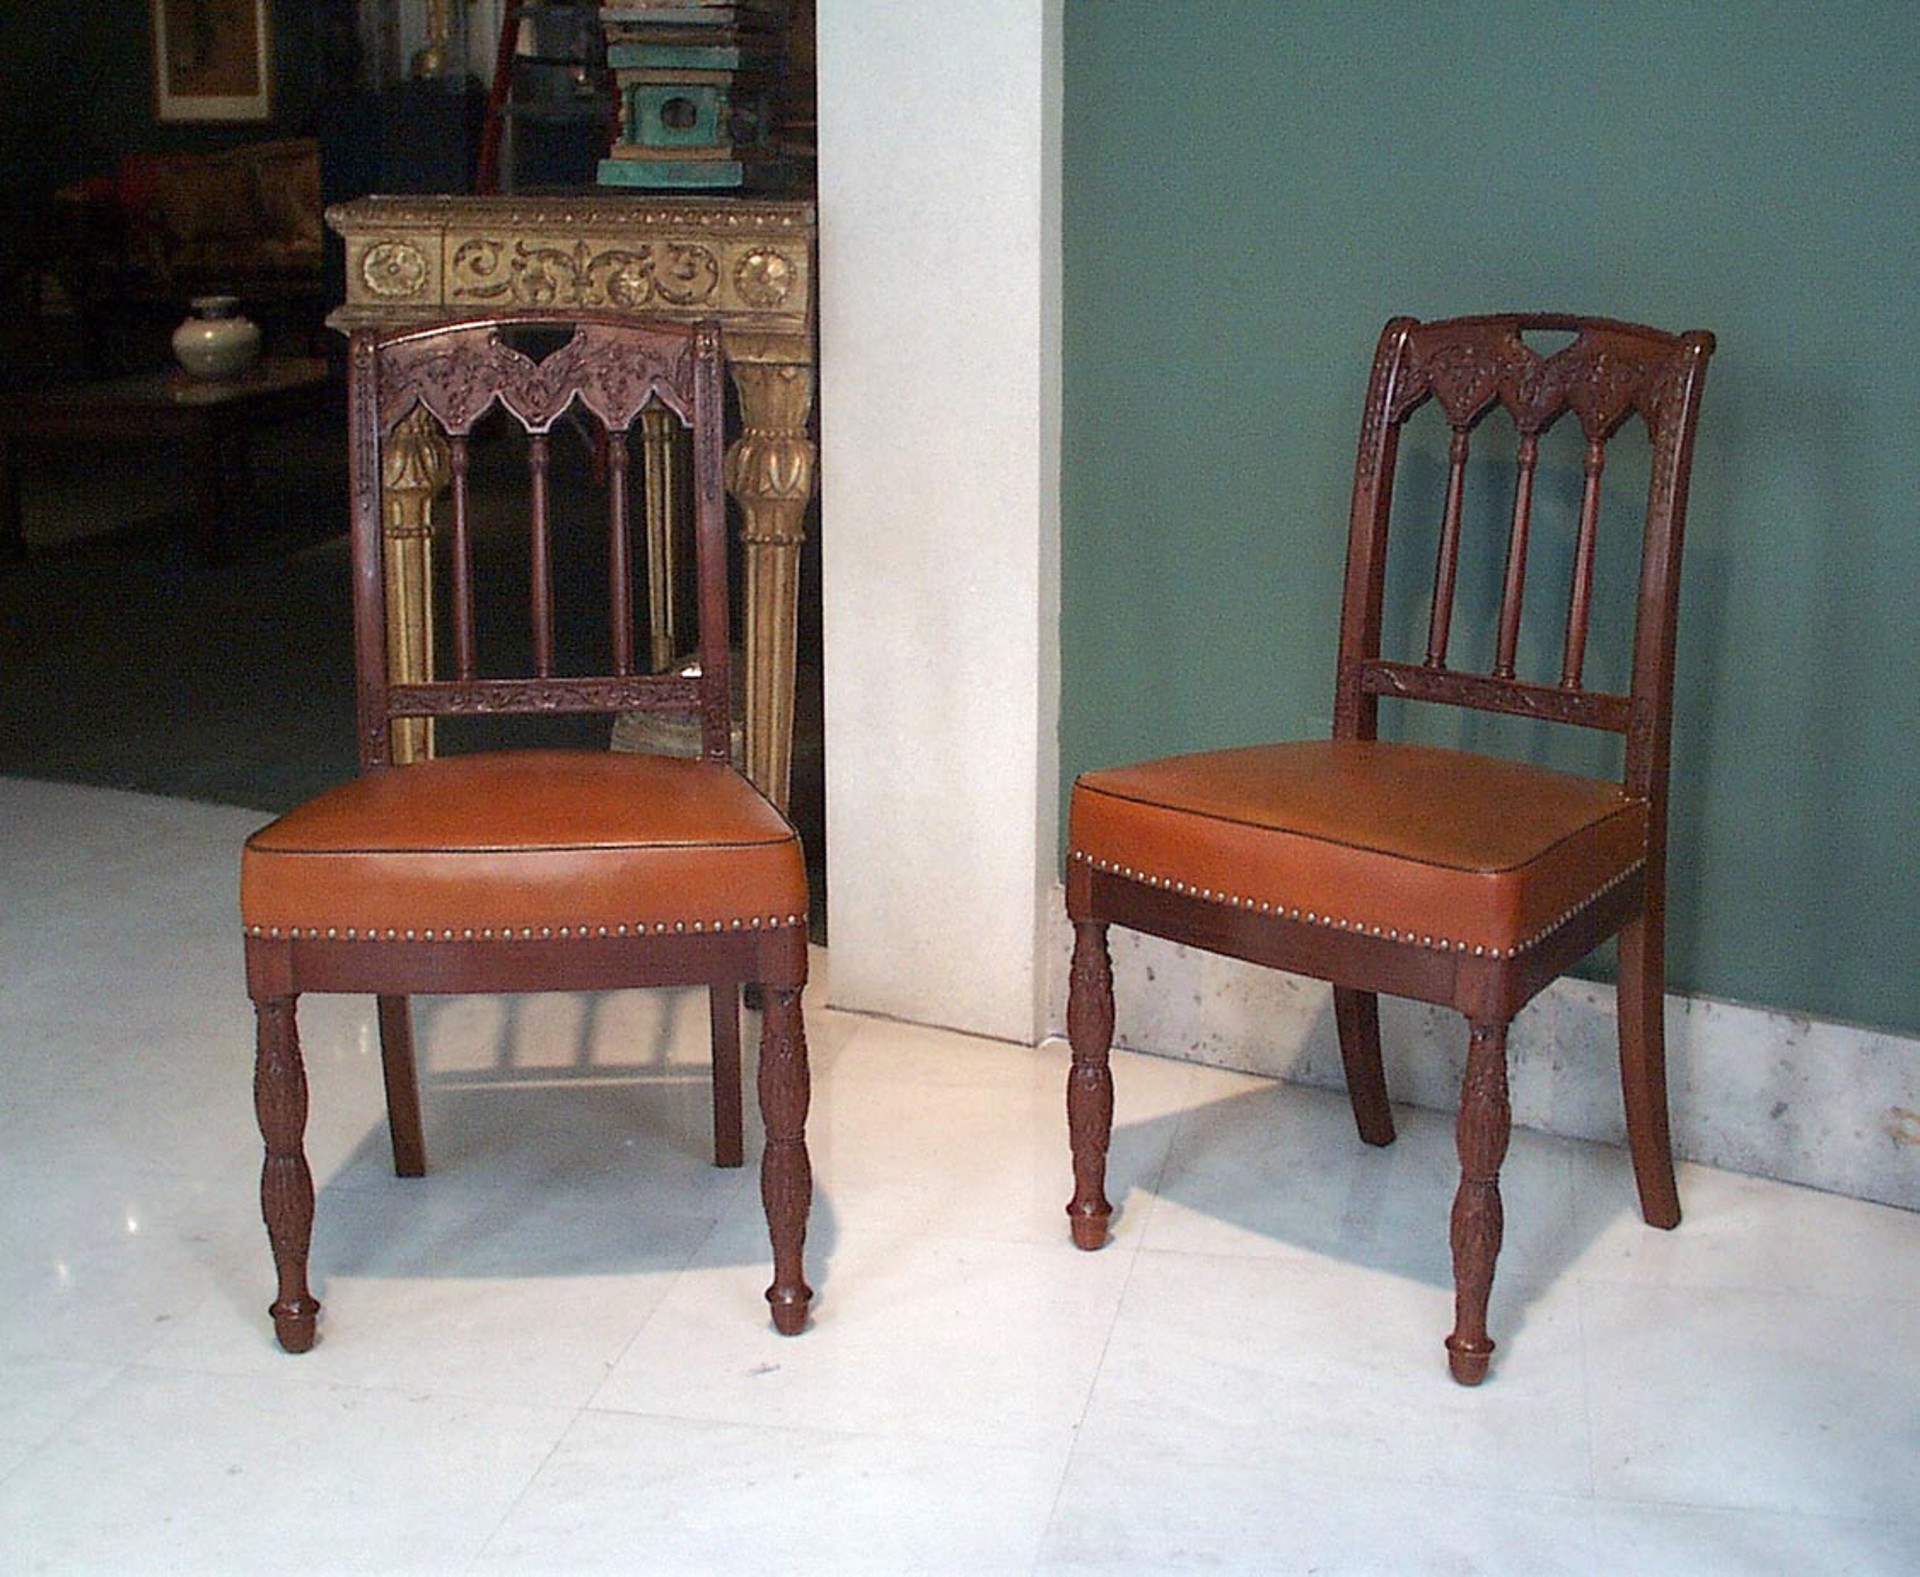 SET OF FIVE MAHOGANY CHAIRS by Louis Bellange